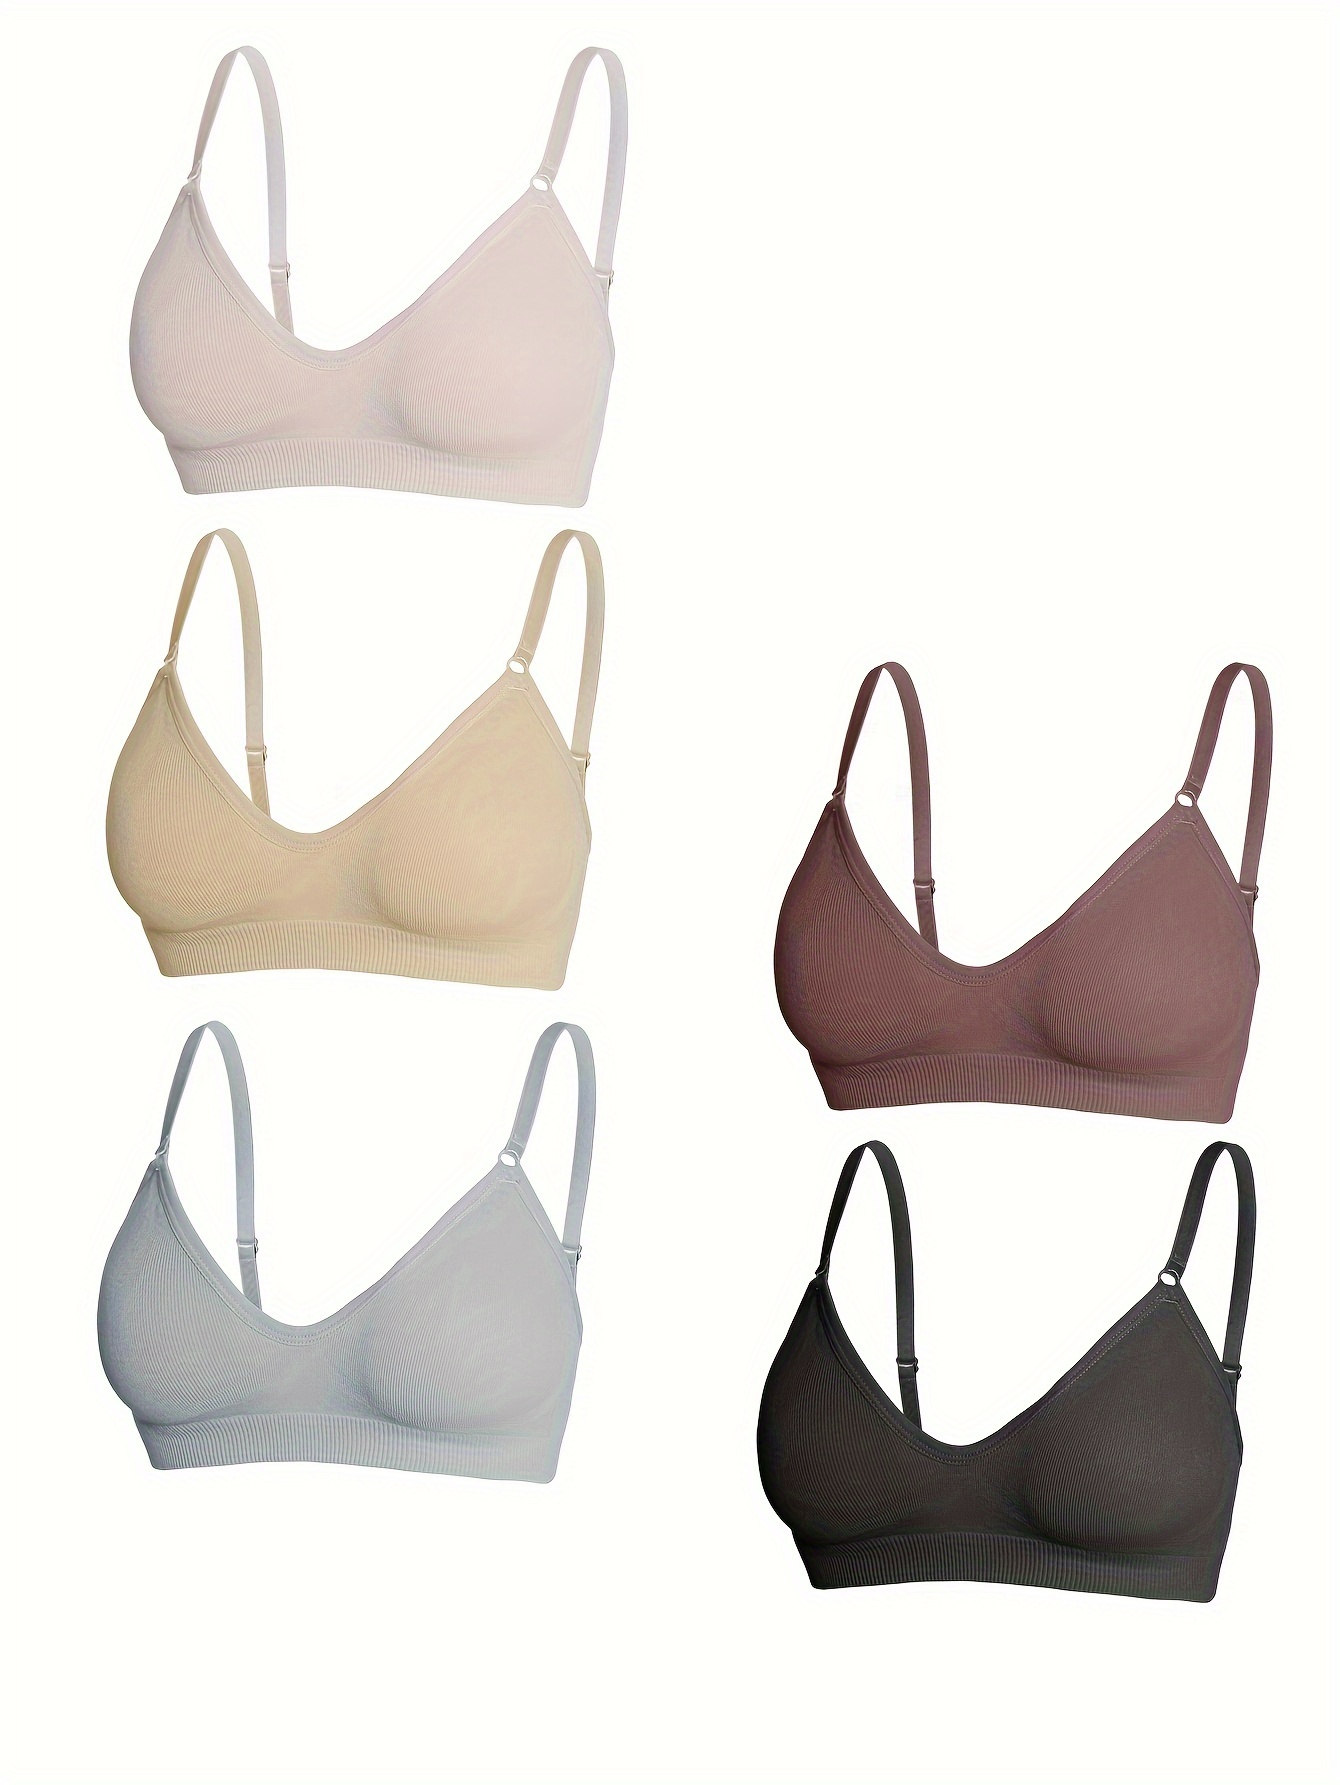 5pcs Soft Ribbed Bralettes, Comfort & Breathable Thin Strap Everyday Bra,  Women's Lingerie & Underwear